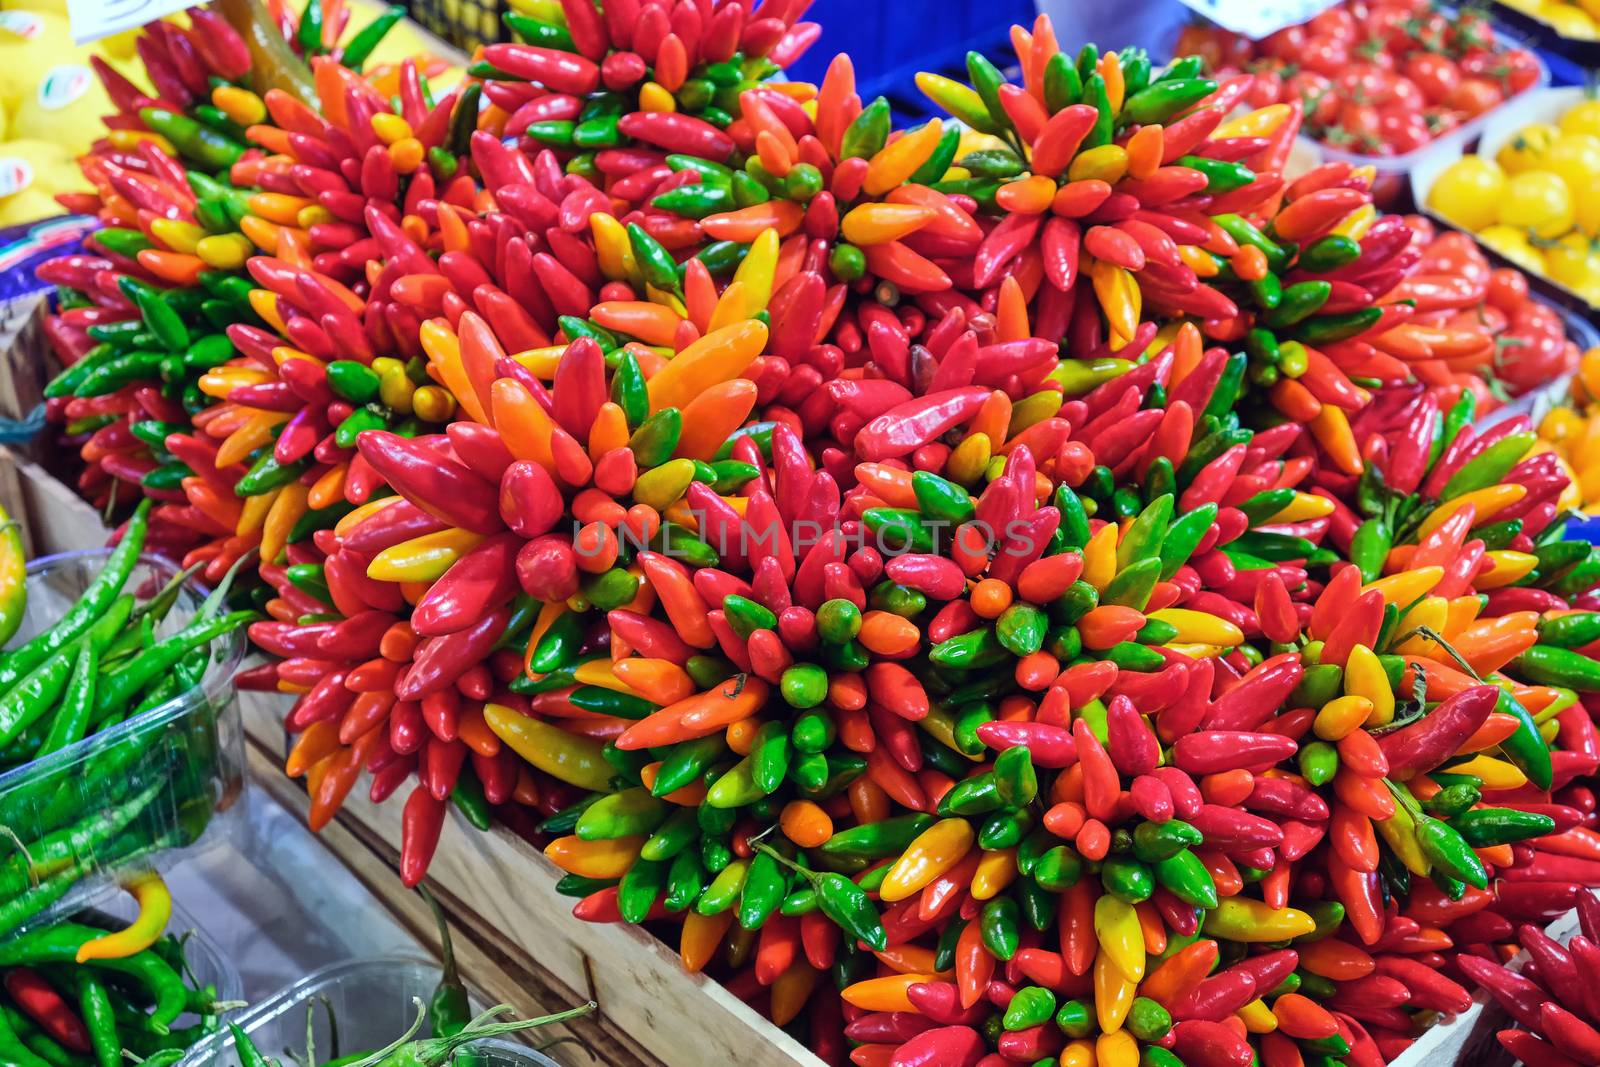 Colorful chili peppers for sale at a market